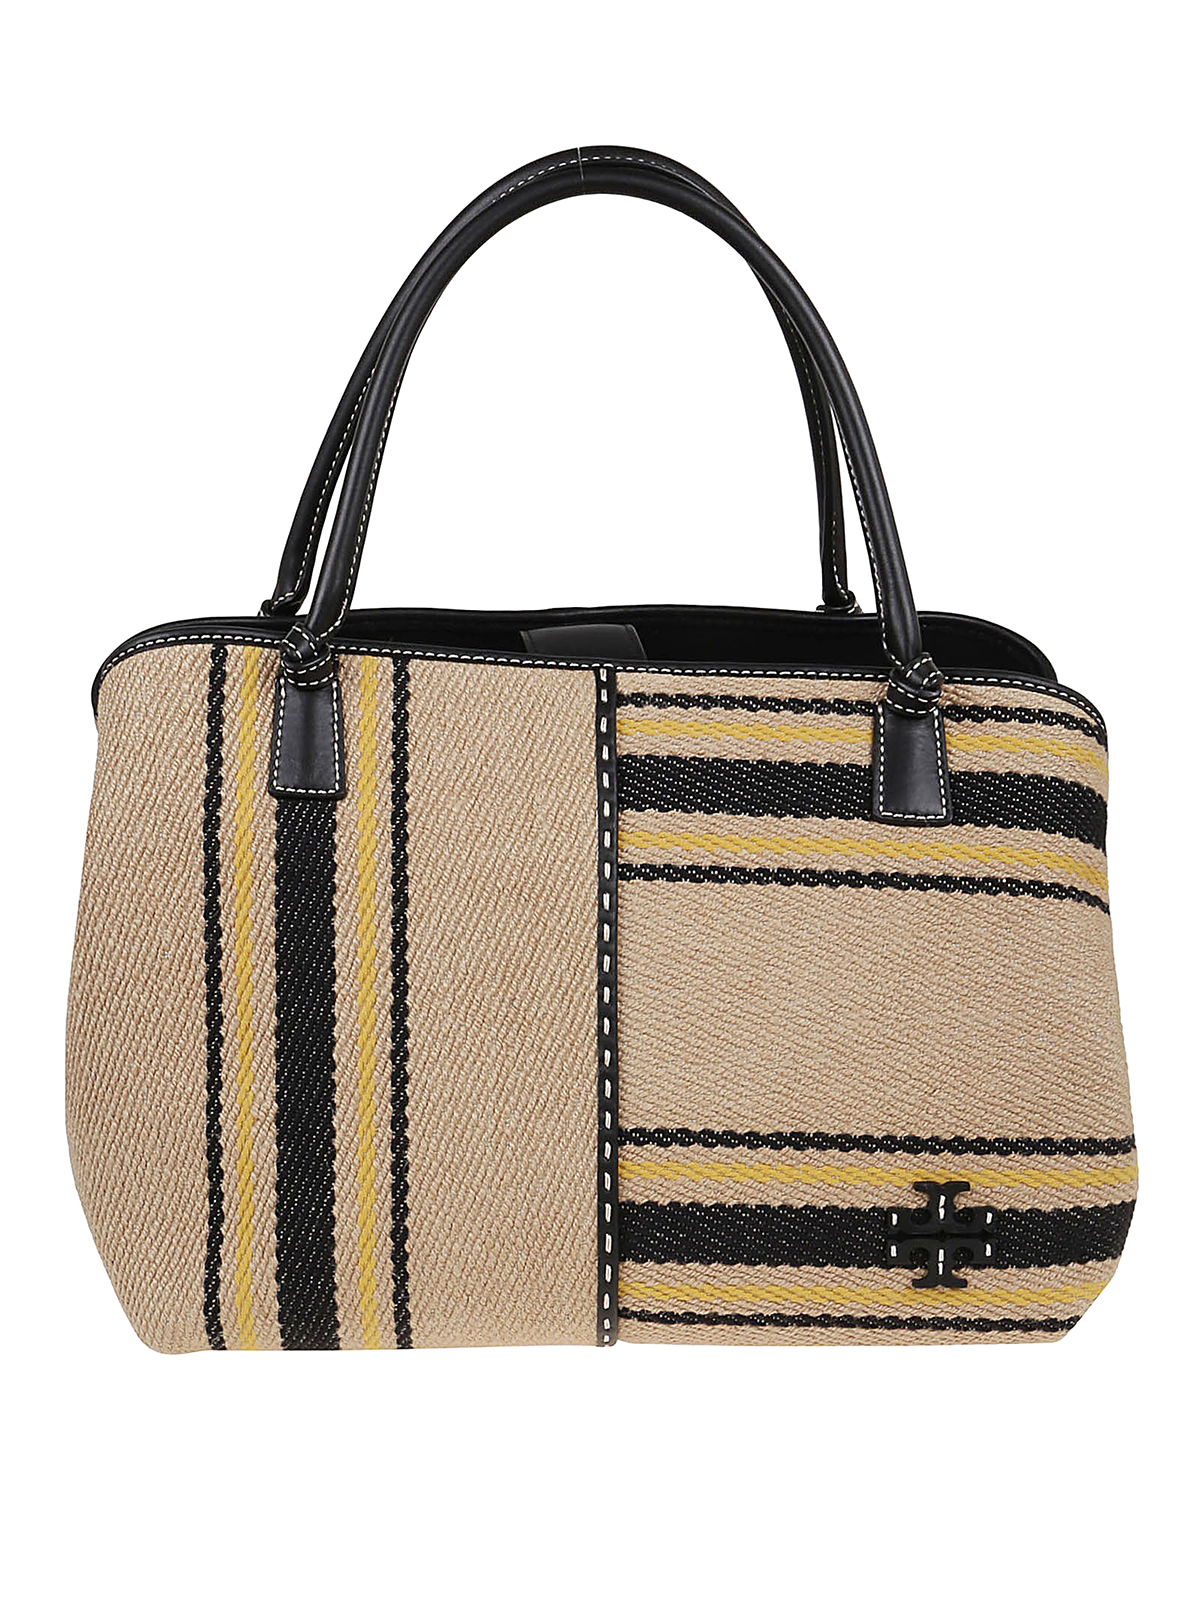 Totes bags Tory Burch - McGraw tote - 81916807 | Shop online at iKRIX